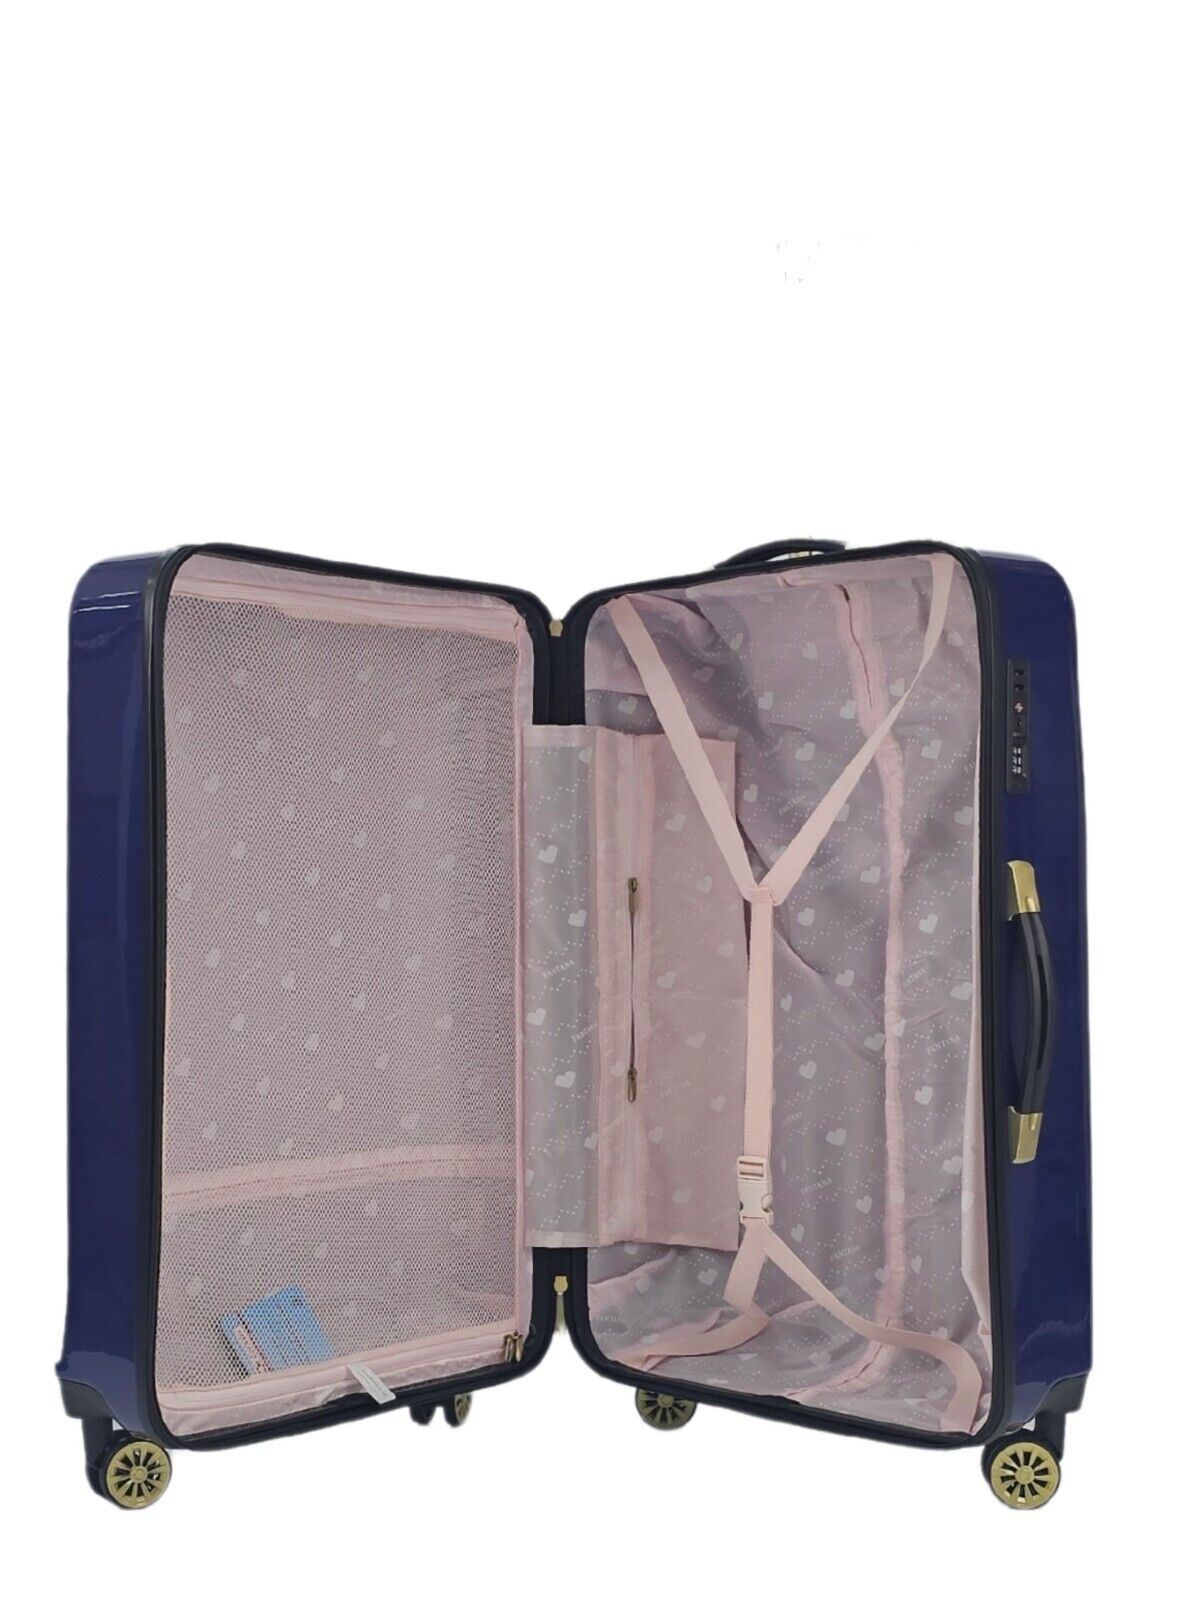 Hard Shell Blue 4 Wheel Suitcase Flower Print Luggage Cabin - Upperclass Fashions 